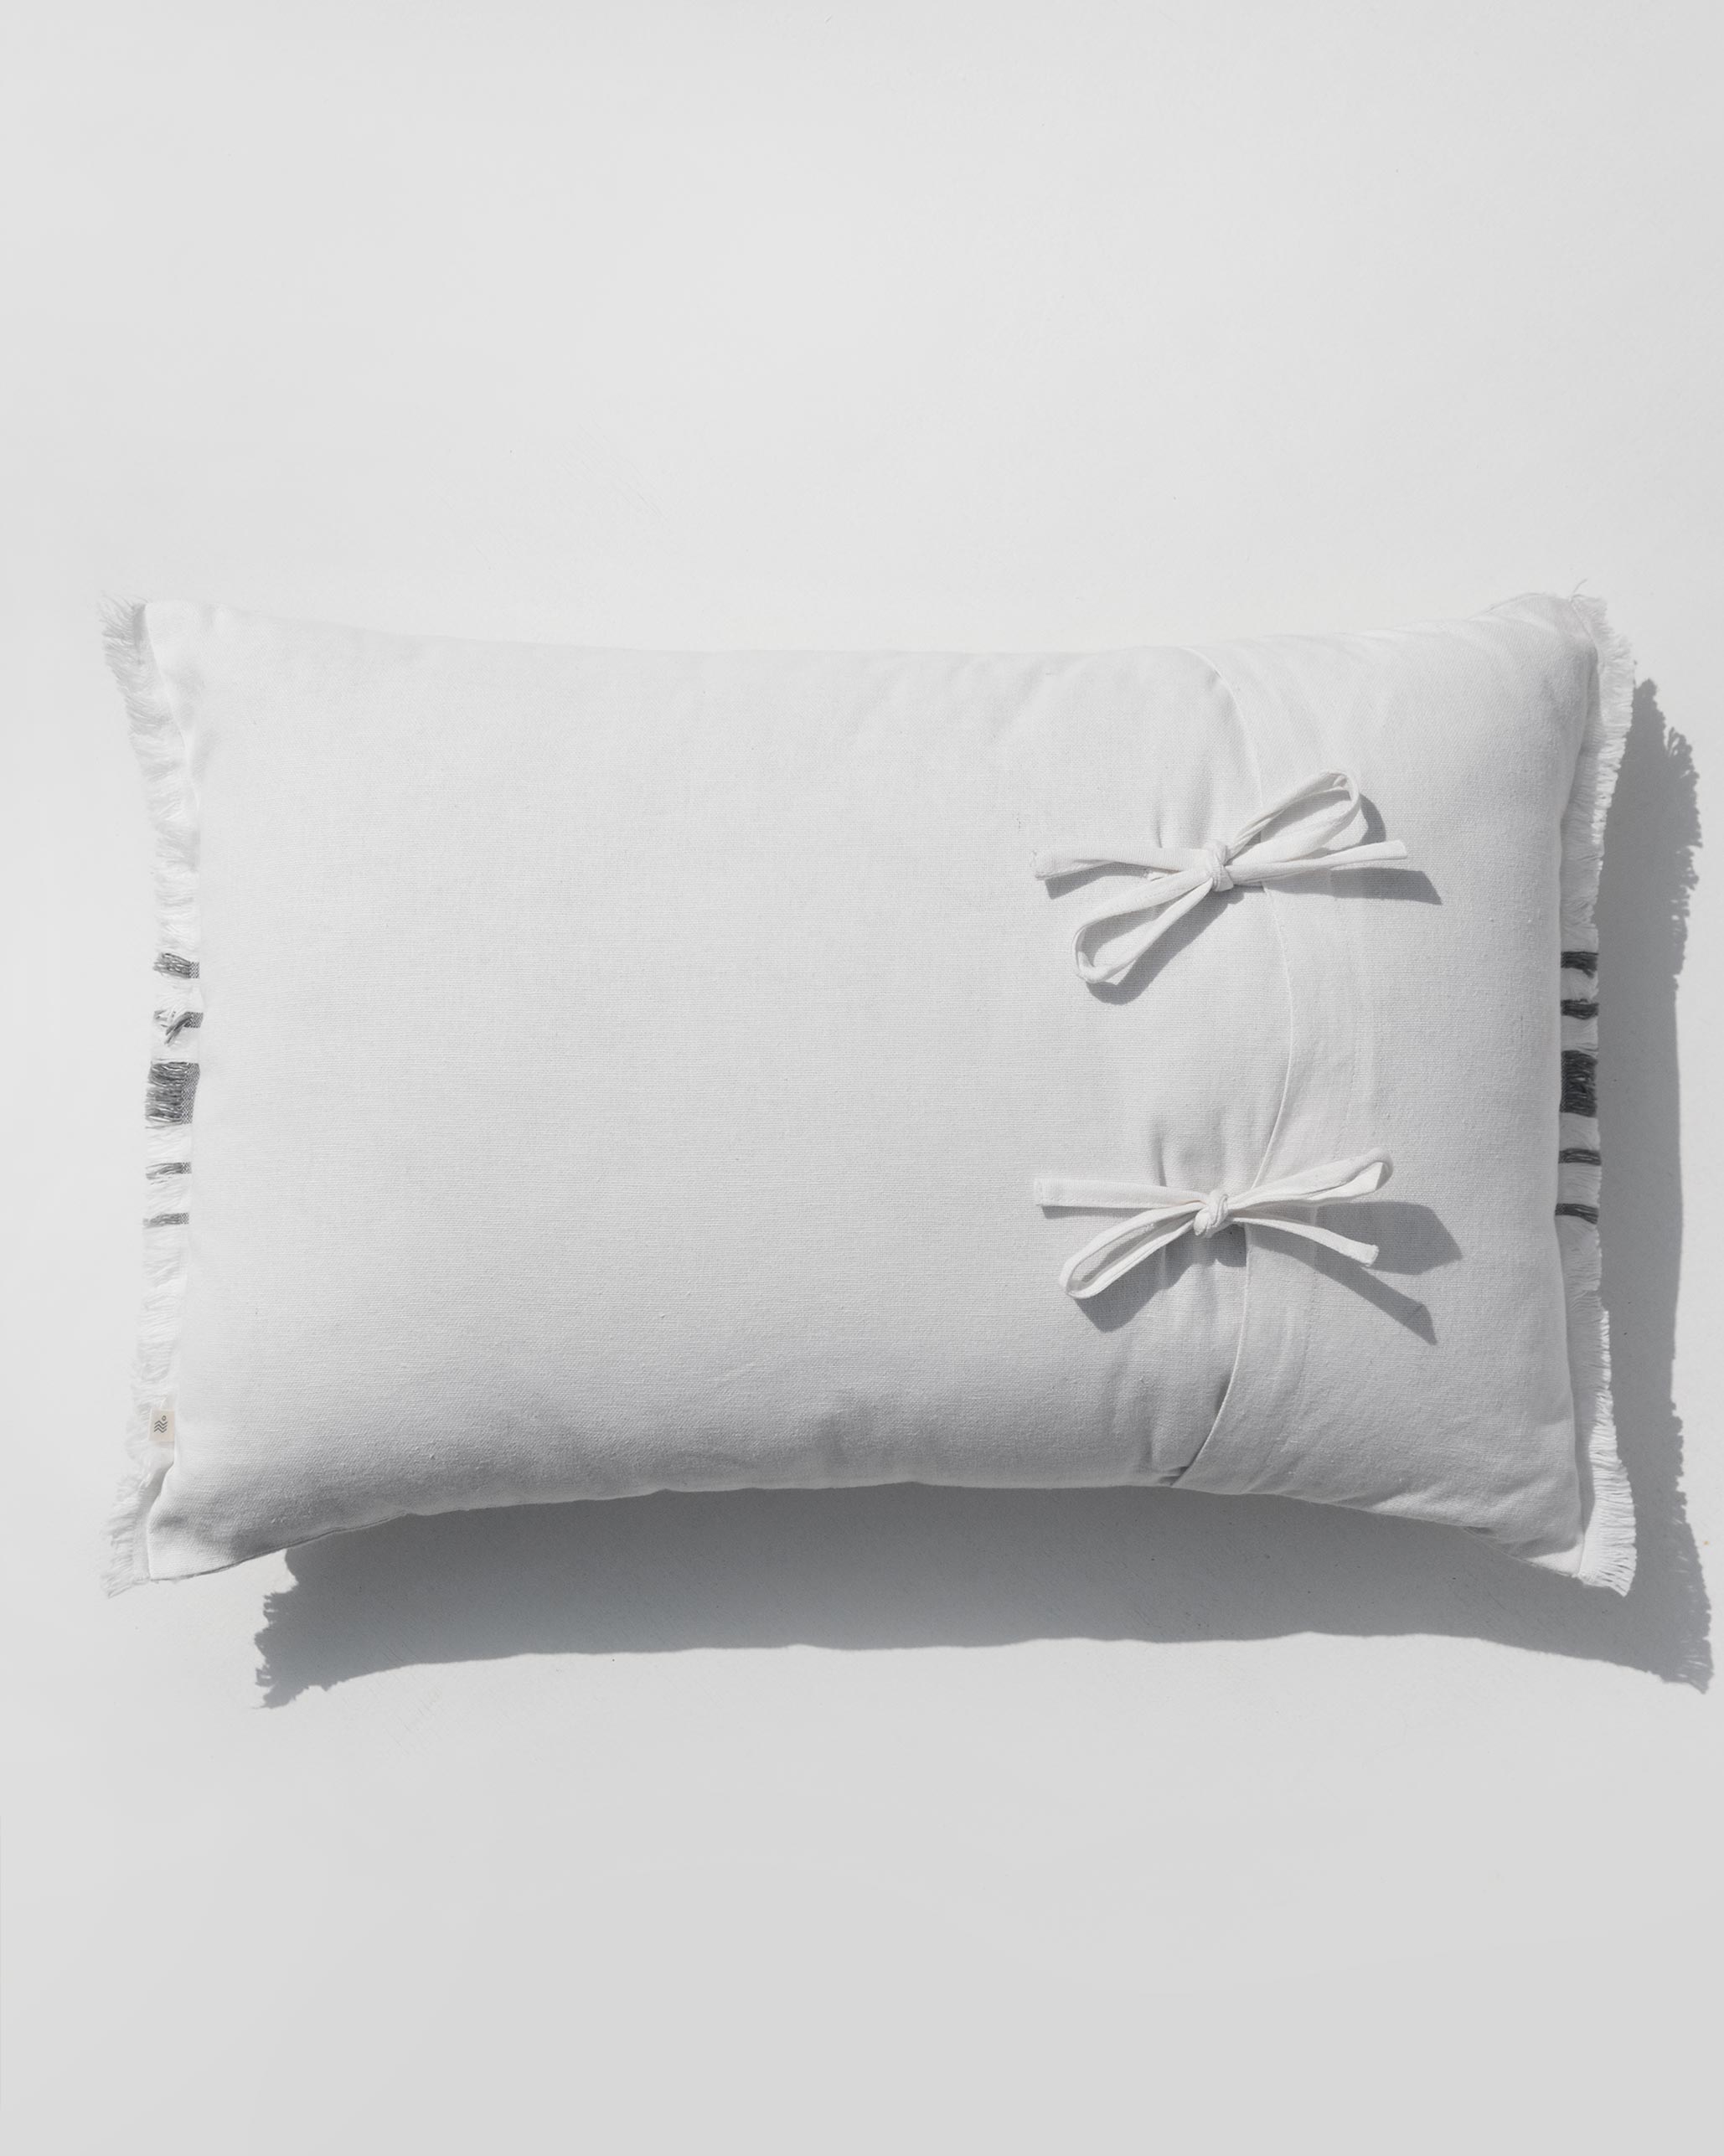 French Stripe Pillow Cover